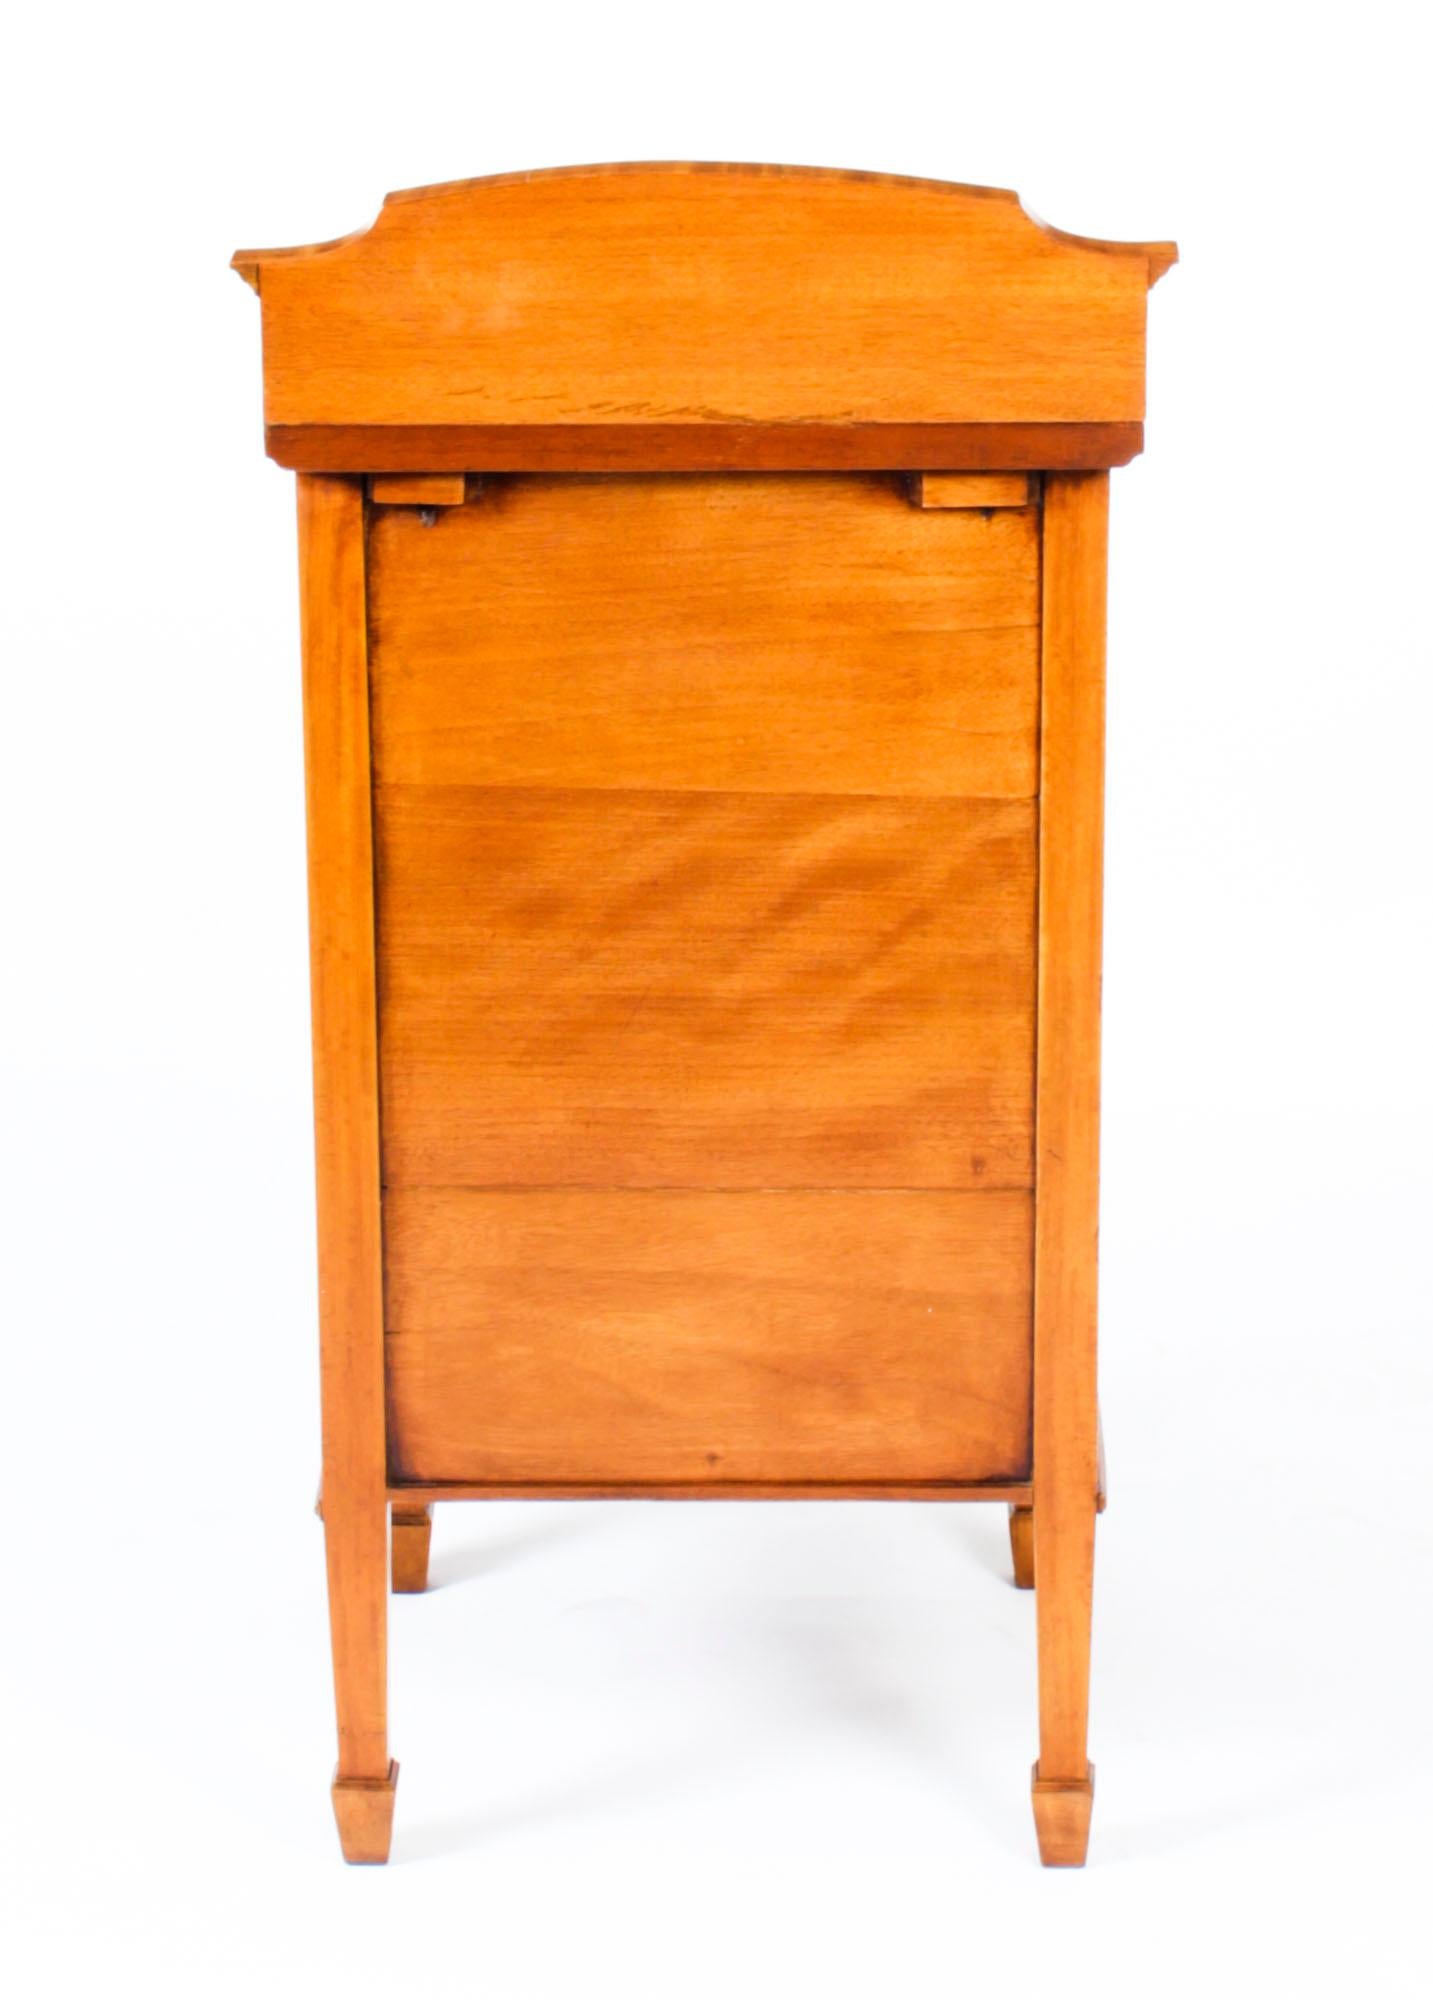 Antique Satinwood and Inlaid Bedside Cabinet, 19th Century For Sale 5